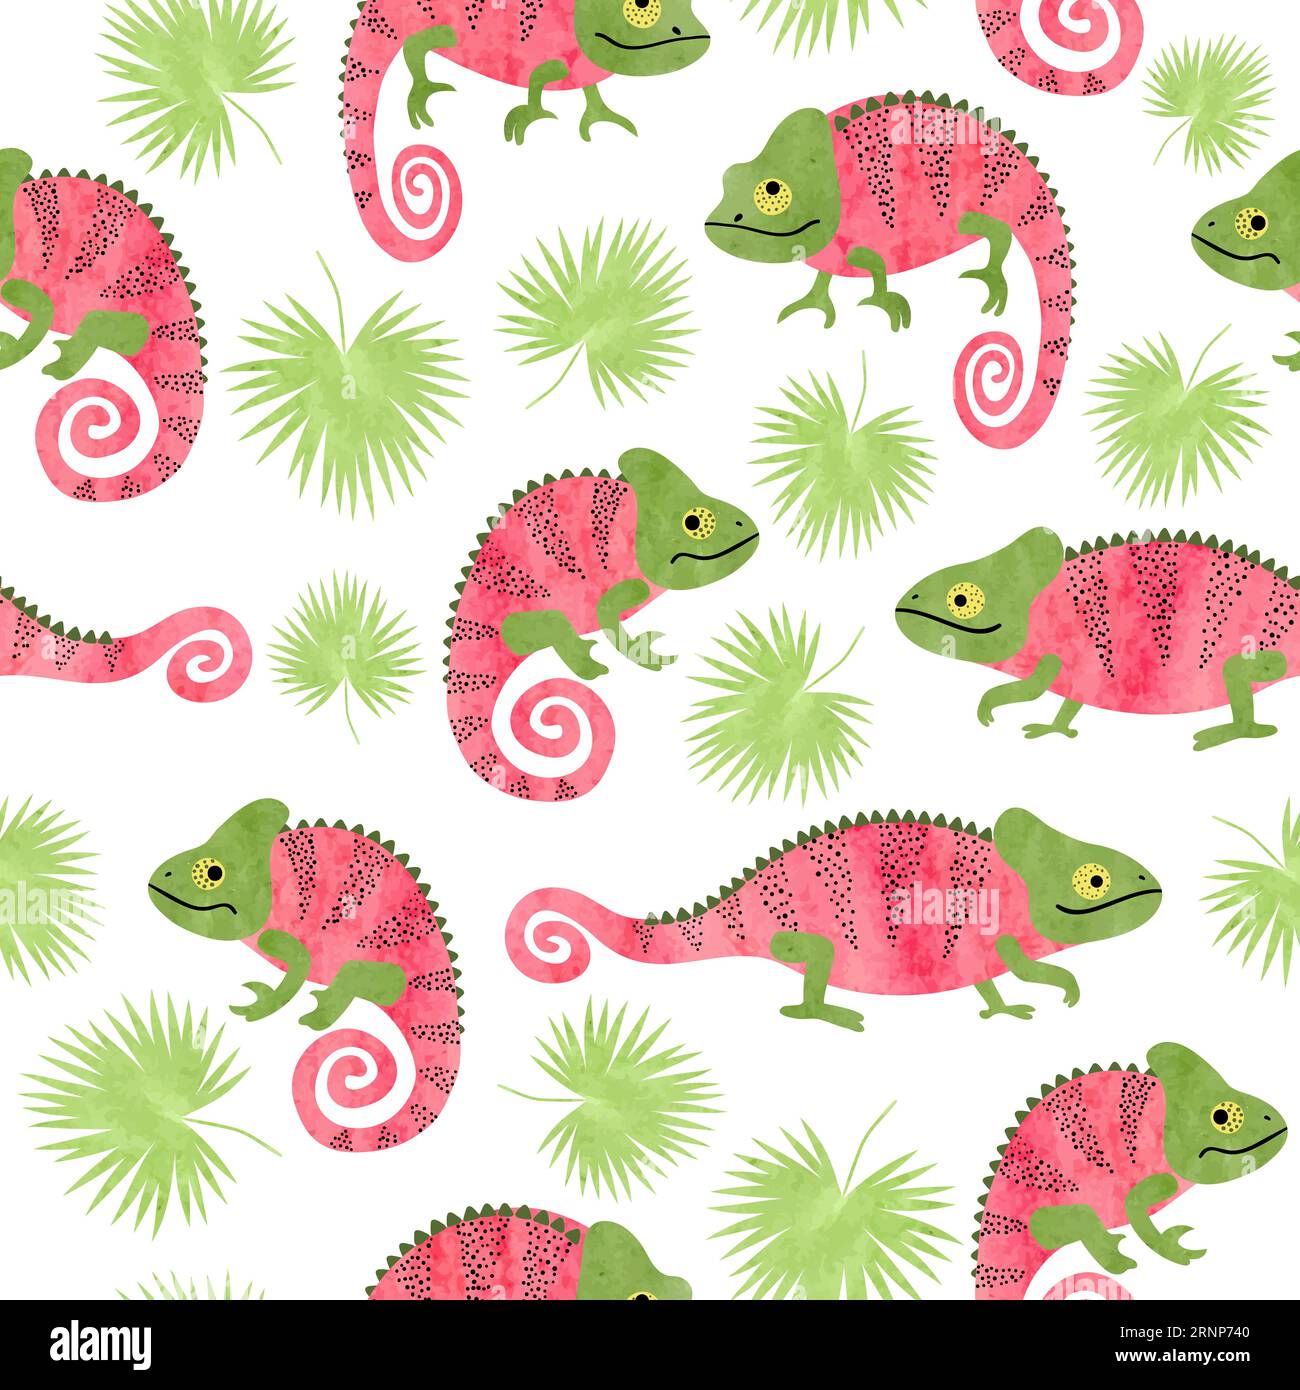 Seamless tropical pattern with cute watercolor chameleons and palm leaves. Stock Vector